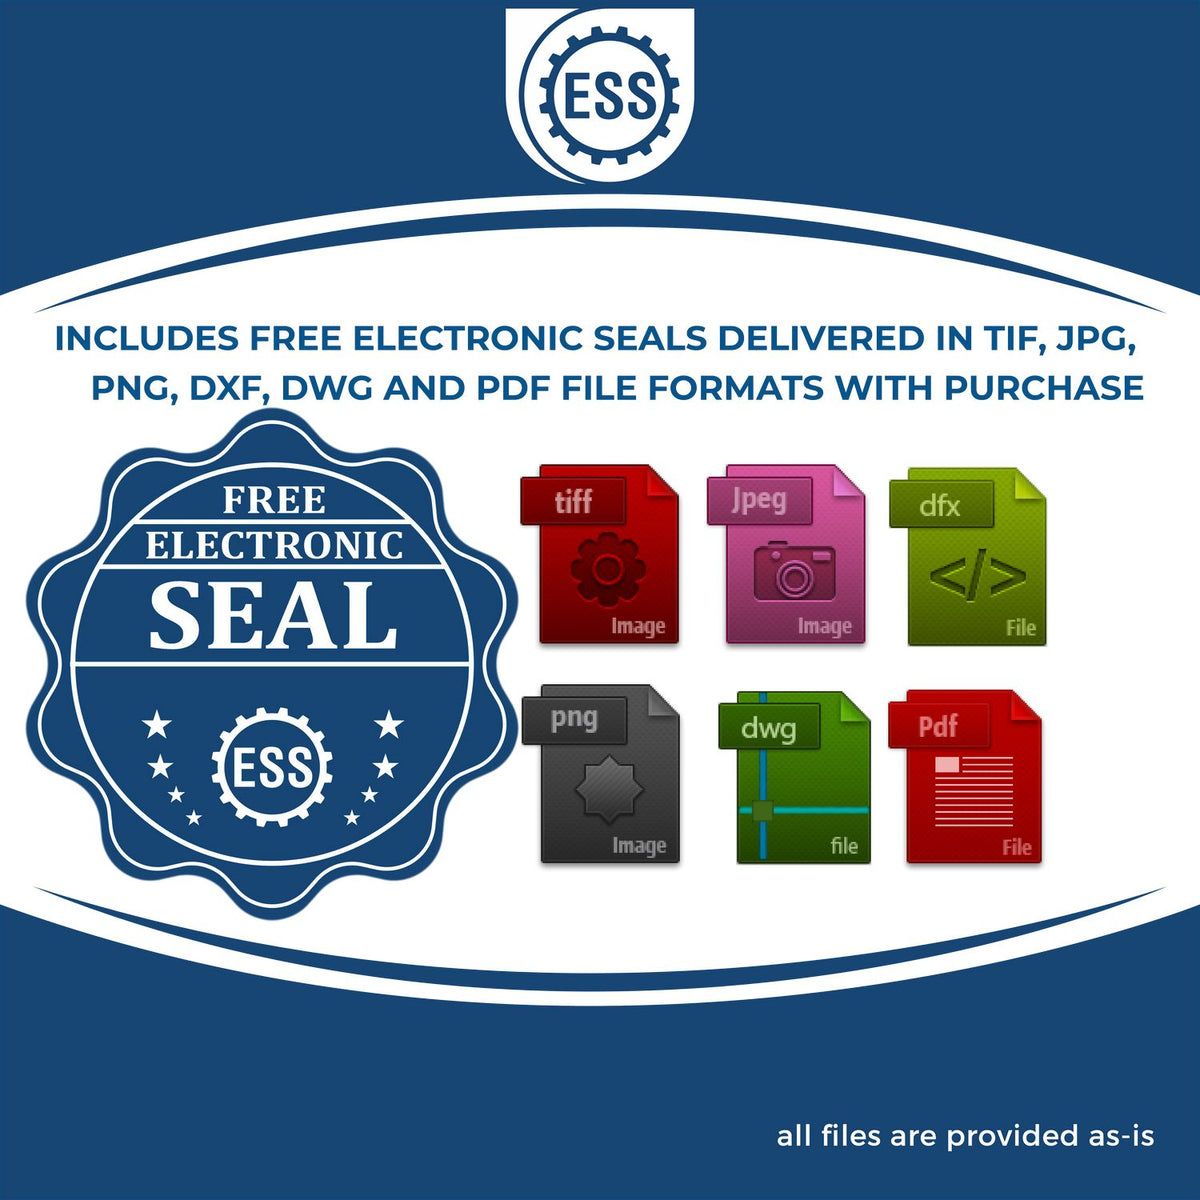 An infographic for the free electronic seal for the Heavy Duty Cast Iron Colorado Land Surveyor Seal Embosser illustrating the different file type icons such as DXF, DWG, TIF, JPG and PNG.